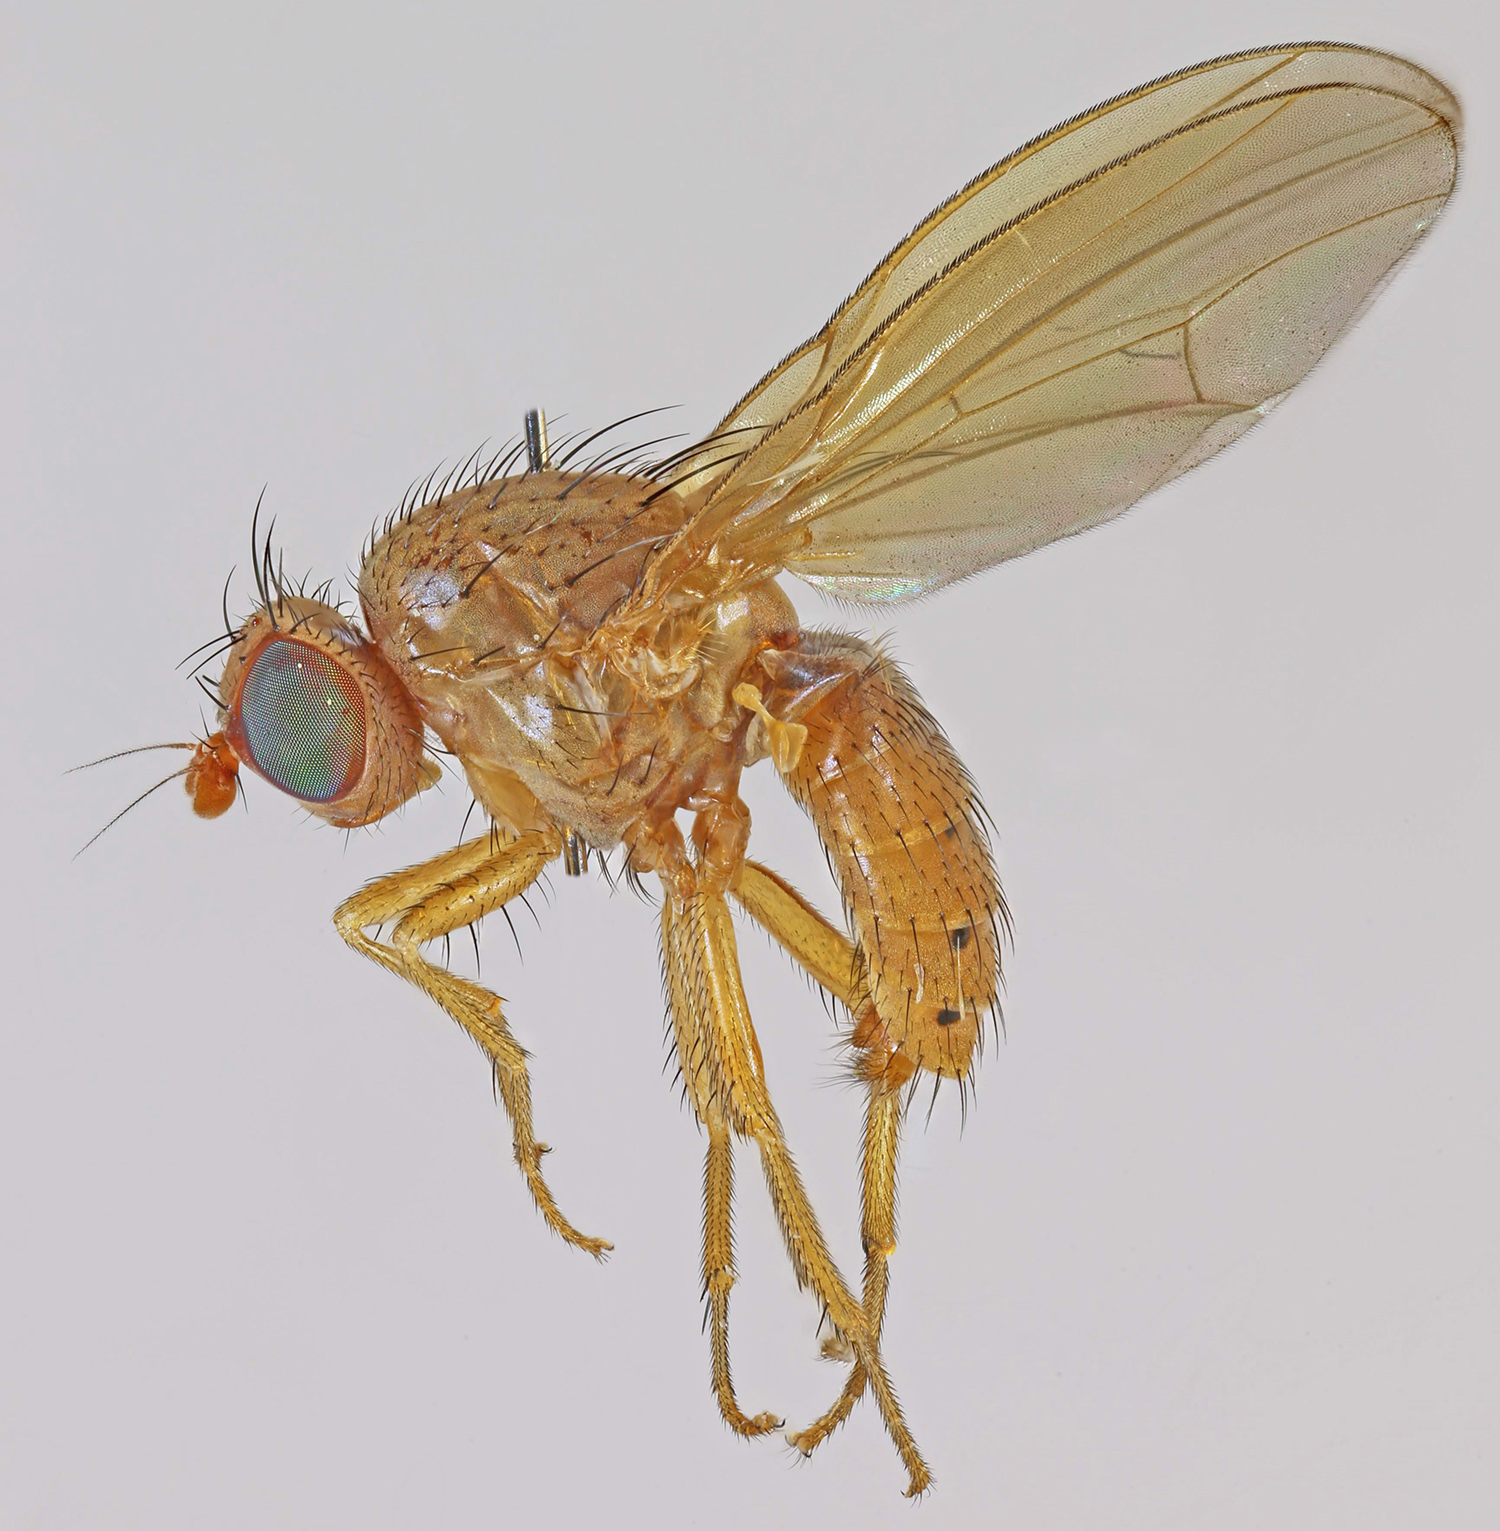 a close - up of a flying fly with bright yellow wings